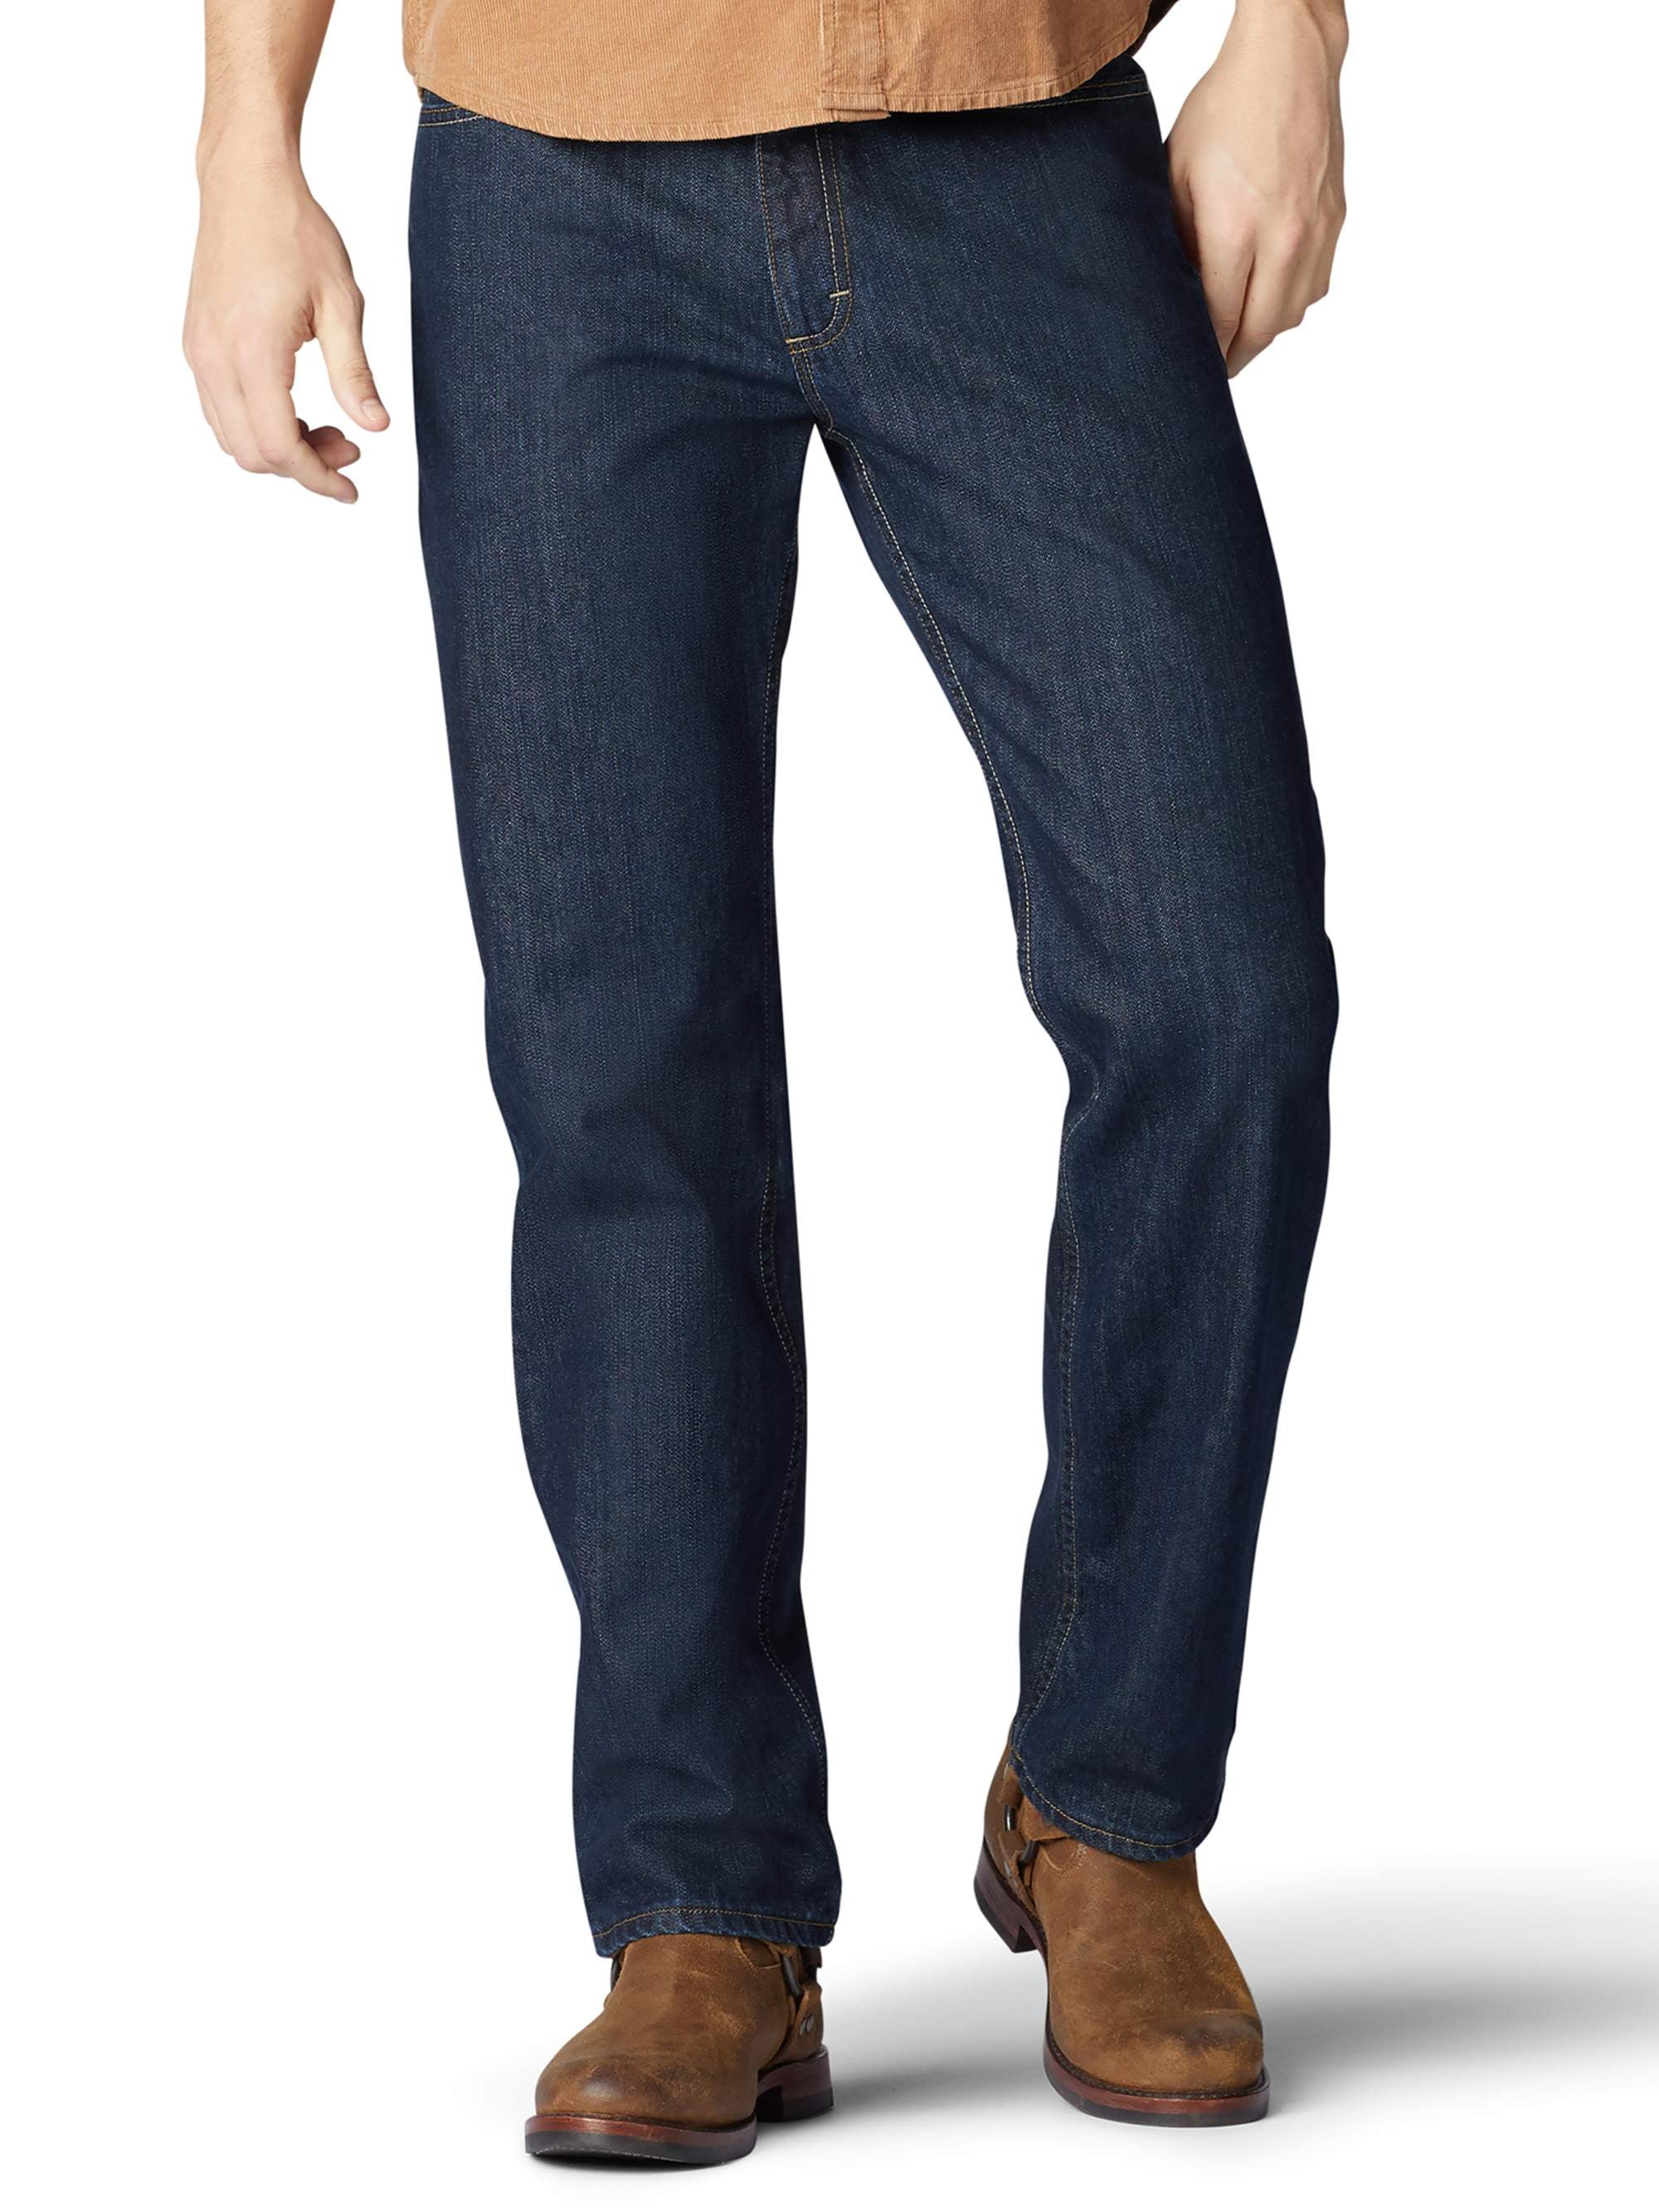 Lee Men's Relaxed Fit Straight Leg Jeans - Walmart.com